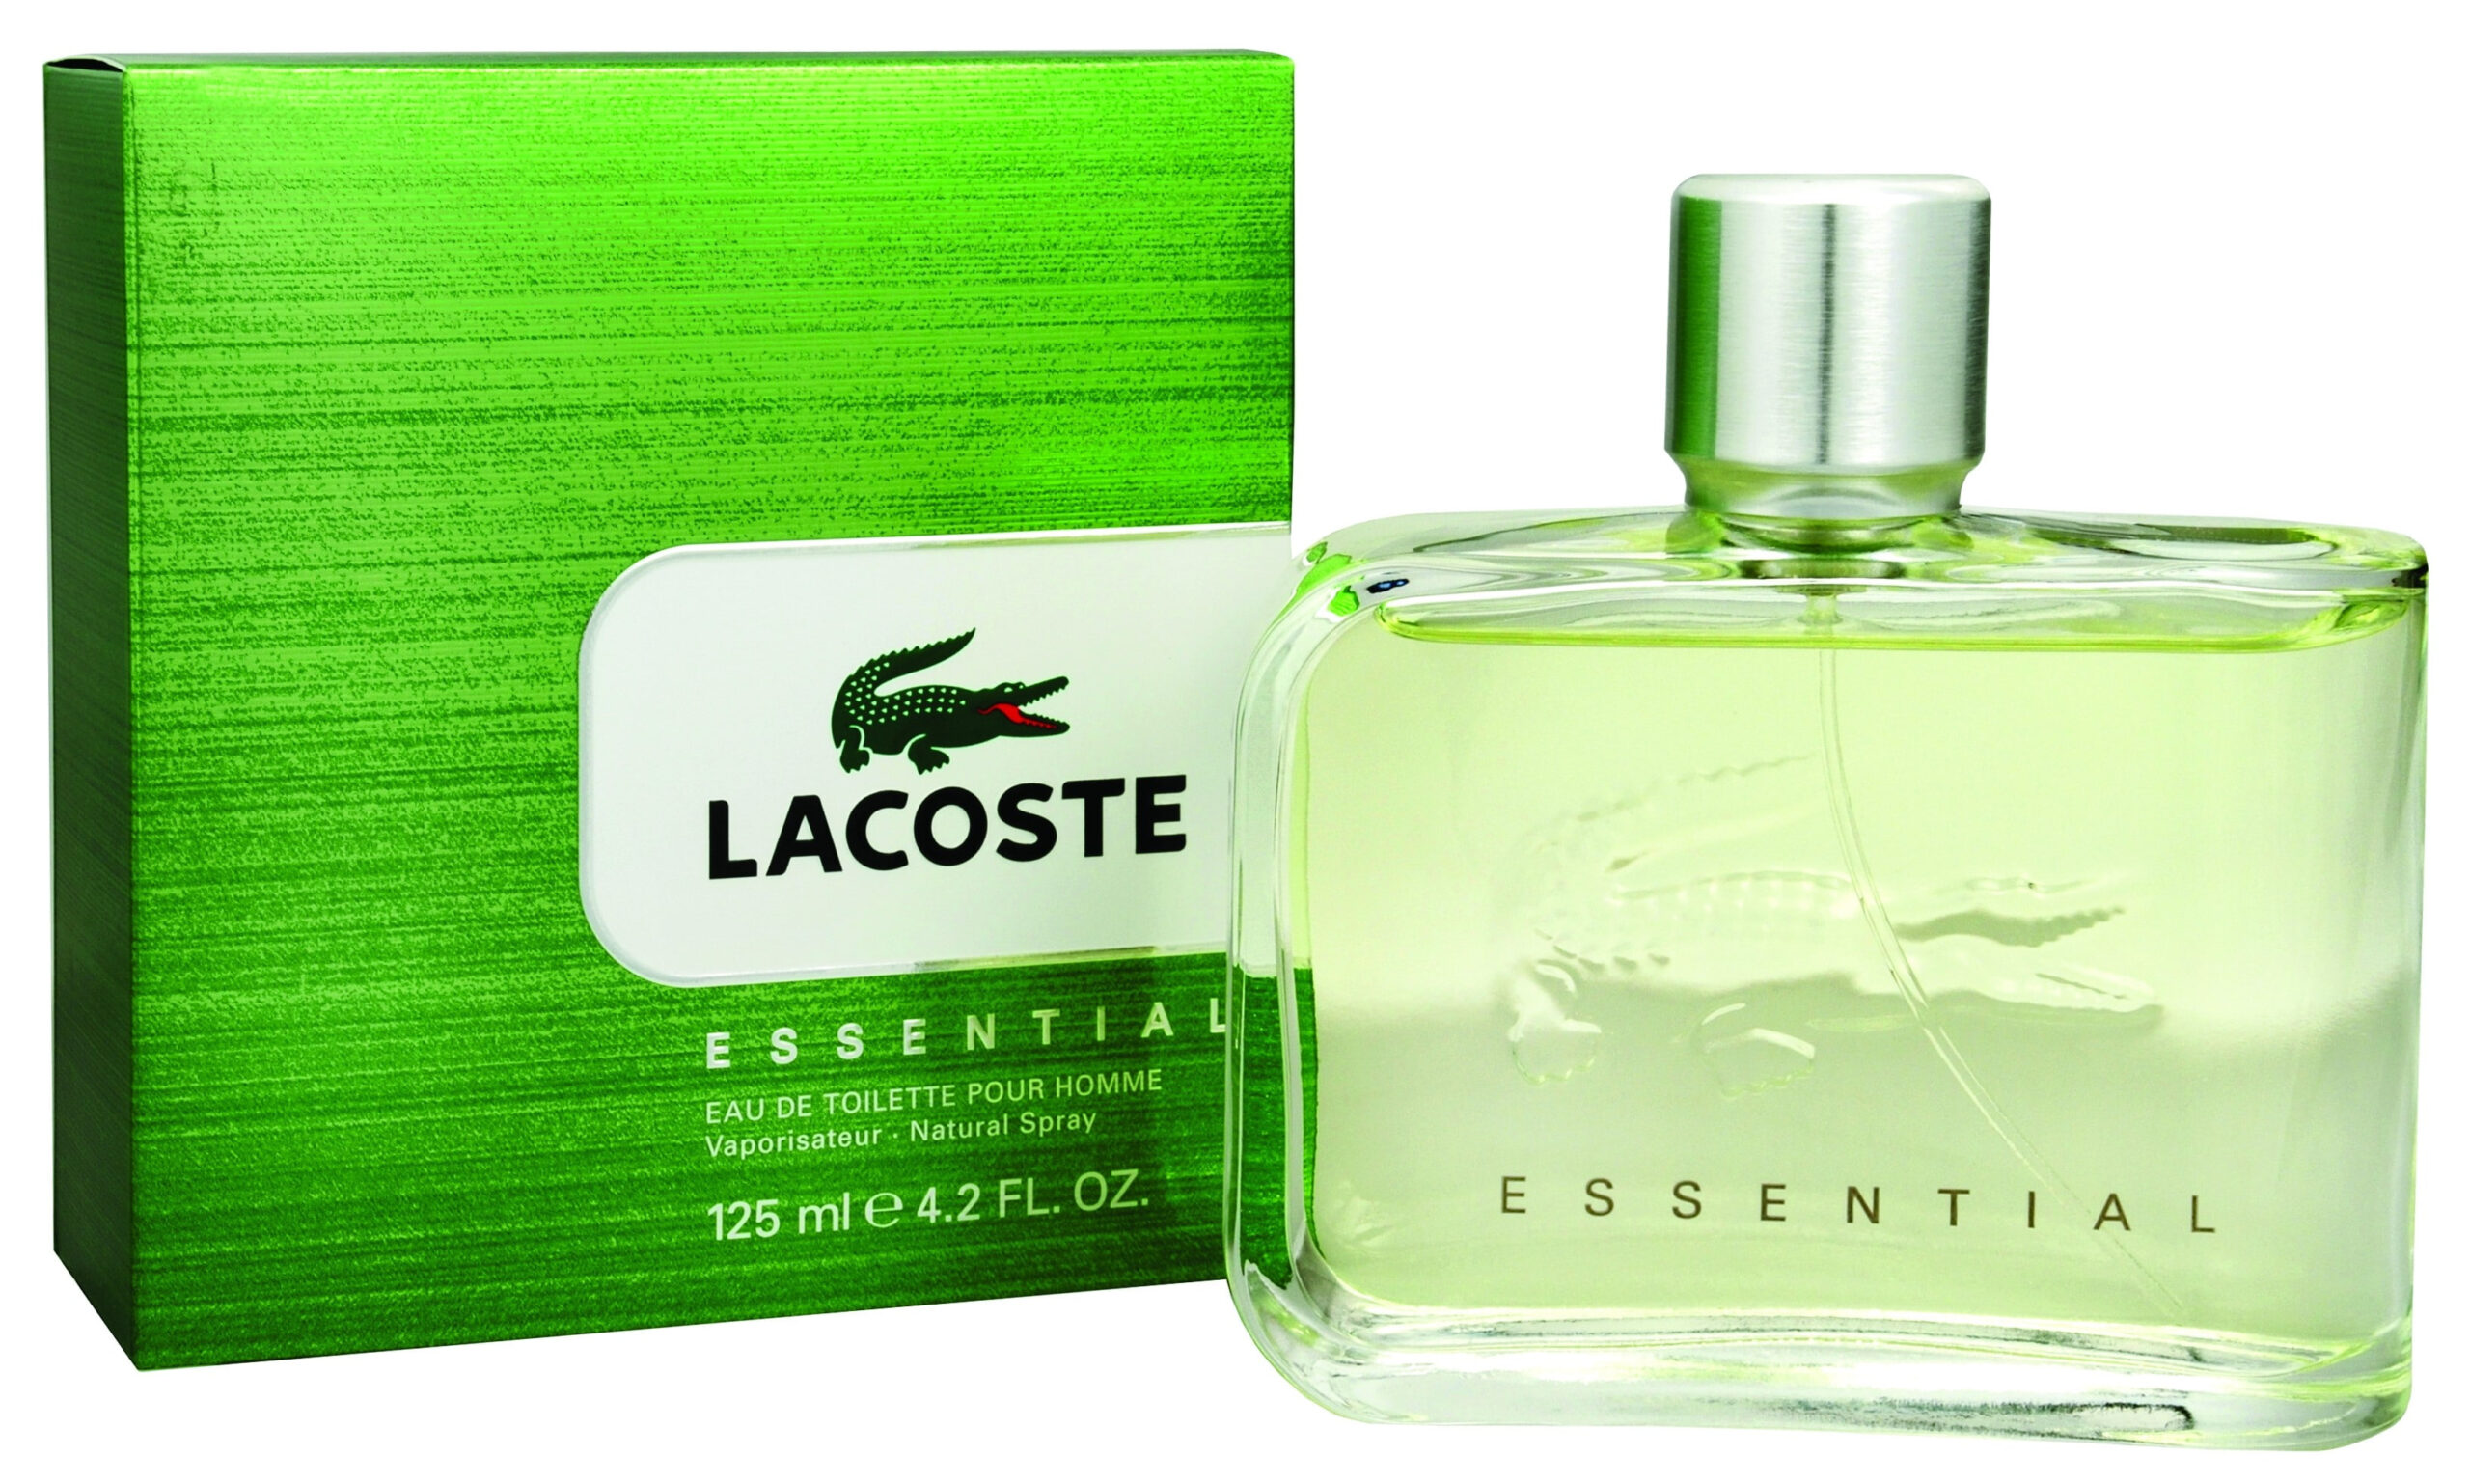 Wallpaper Lacoste, Essential, Perfume, Notes, Lacoste Wallpaper, Other